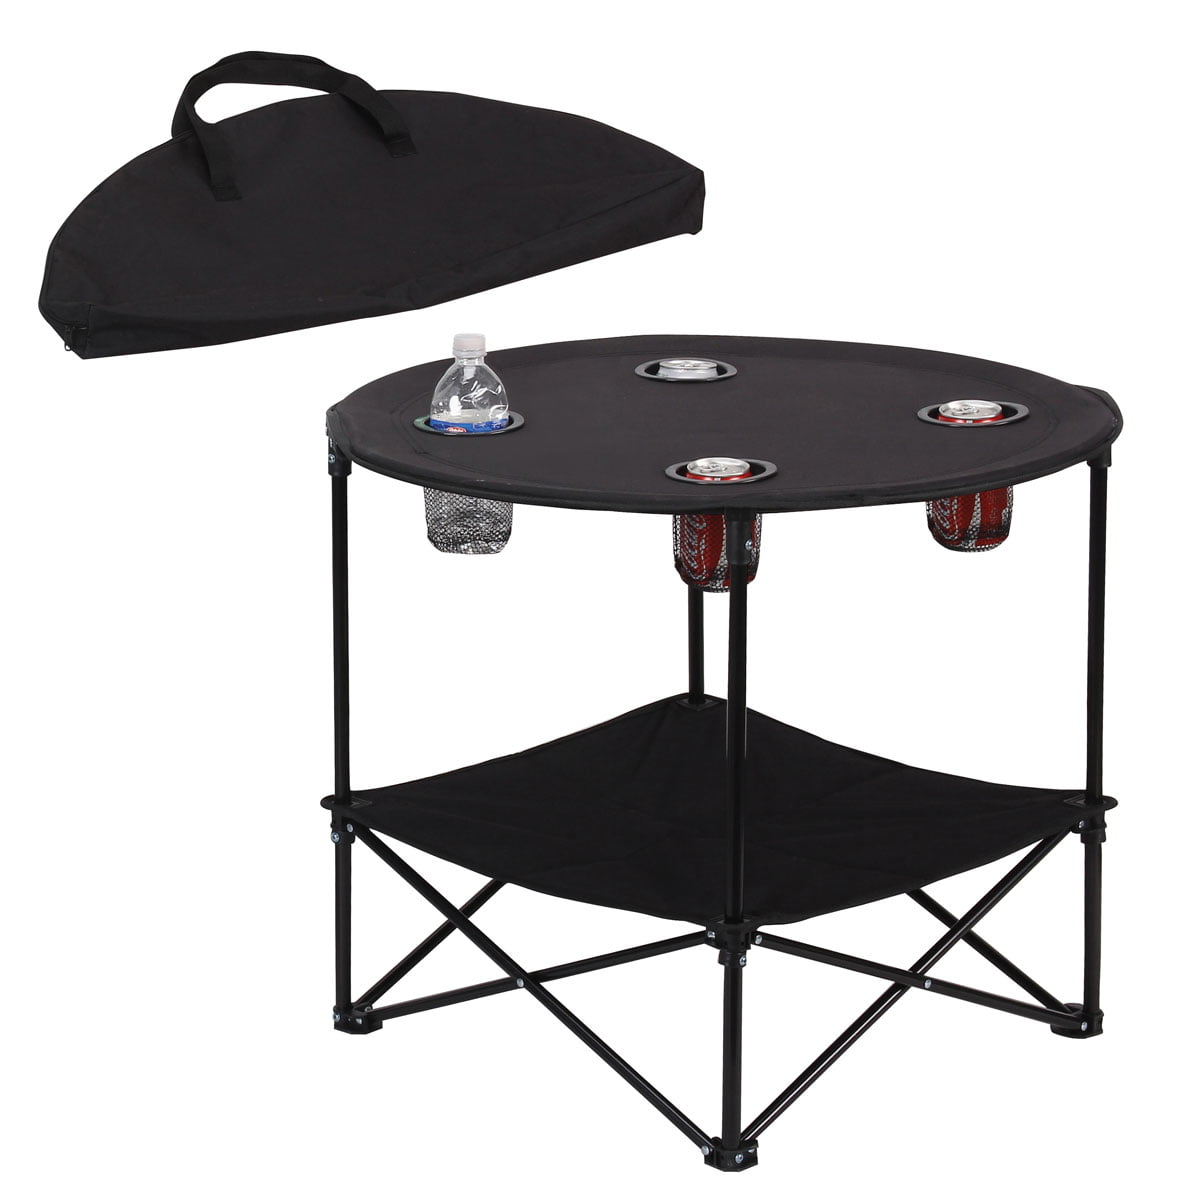 Portable Outdoor Folding Picnic 27-1/2" Collapsible Round Table w 4 Cup Holders 